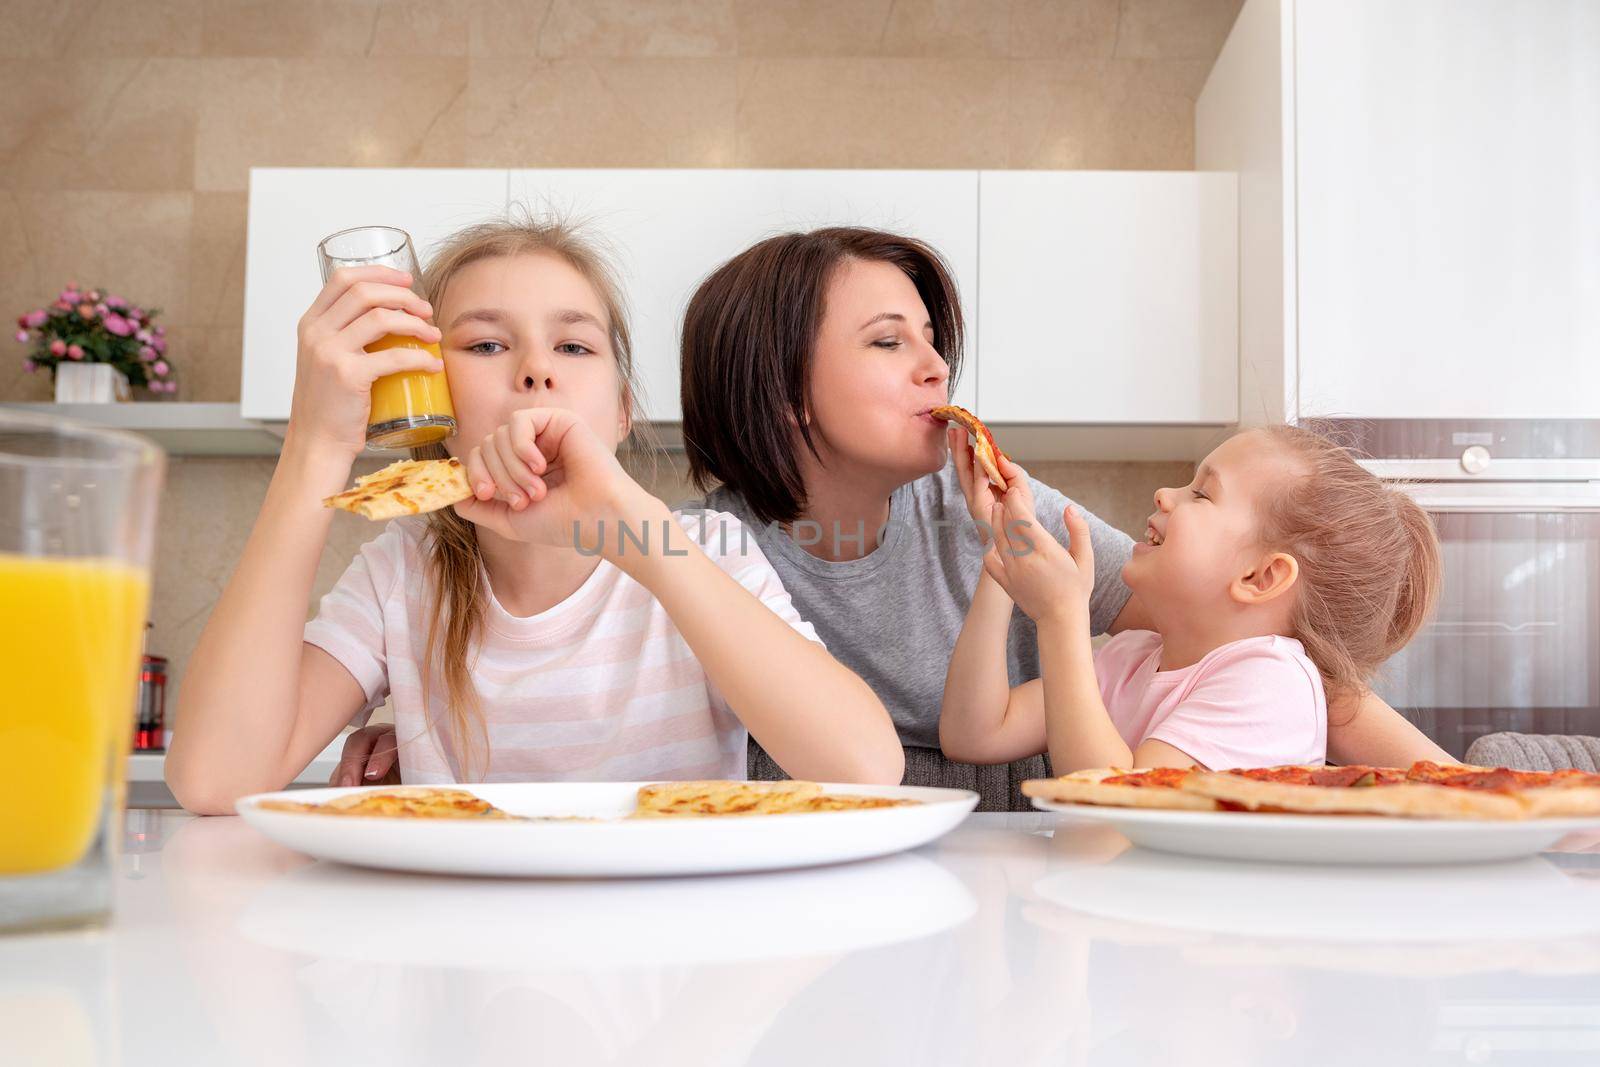 Mother and two daughters eating homemade pizza at a table in kitchen, happy family concept by Mariakray